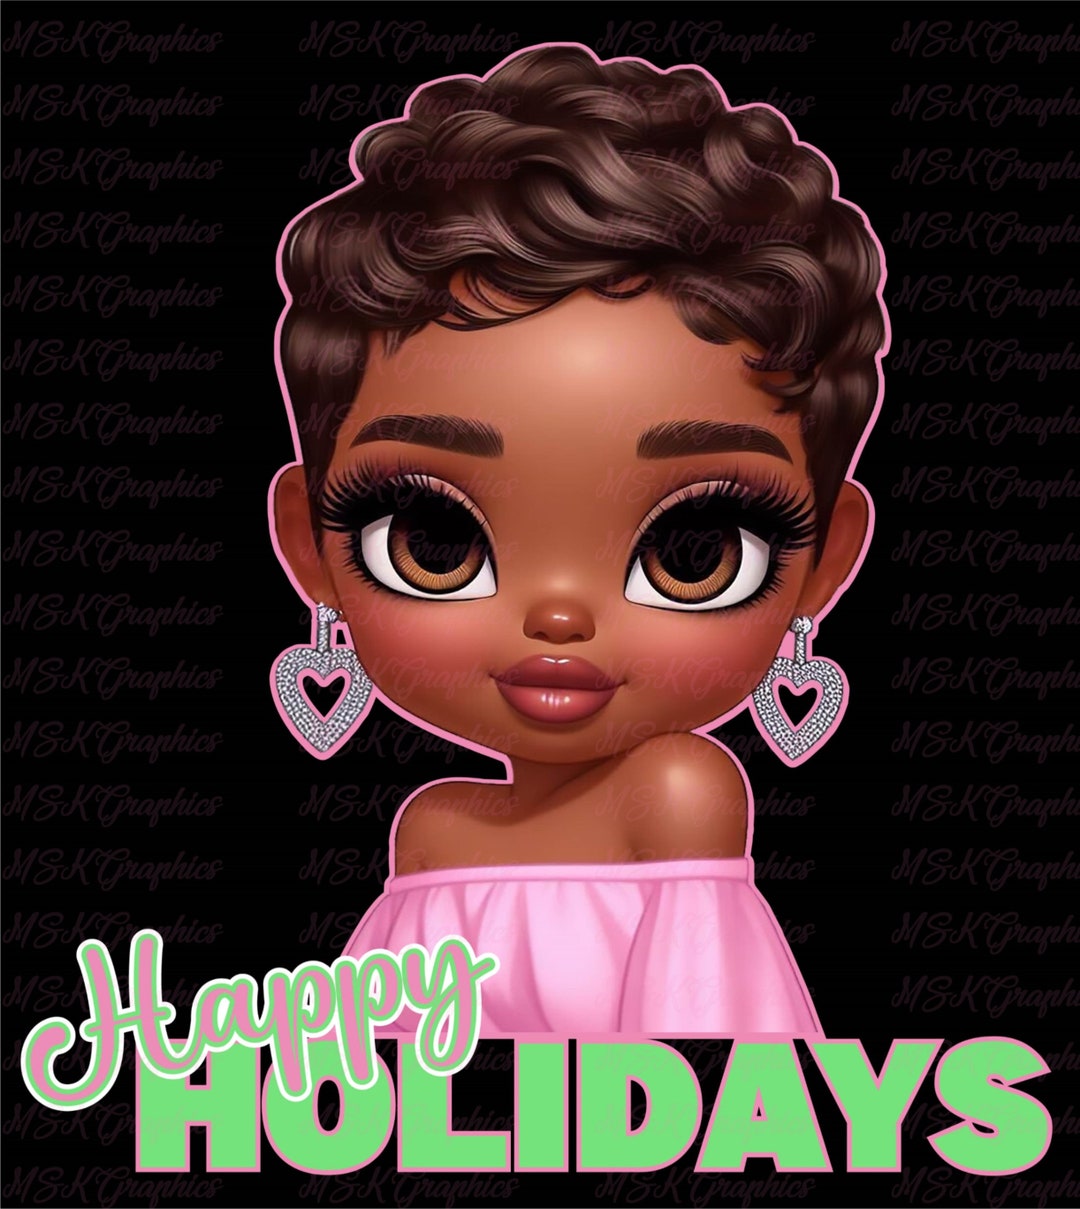 Onya, Transparent, High Quality Png, Classy Lady, Woman, Happy Holidays ...